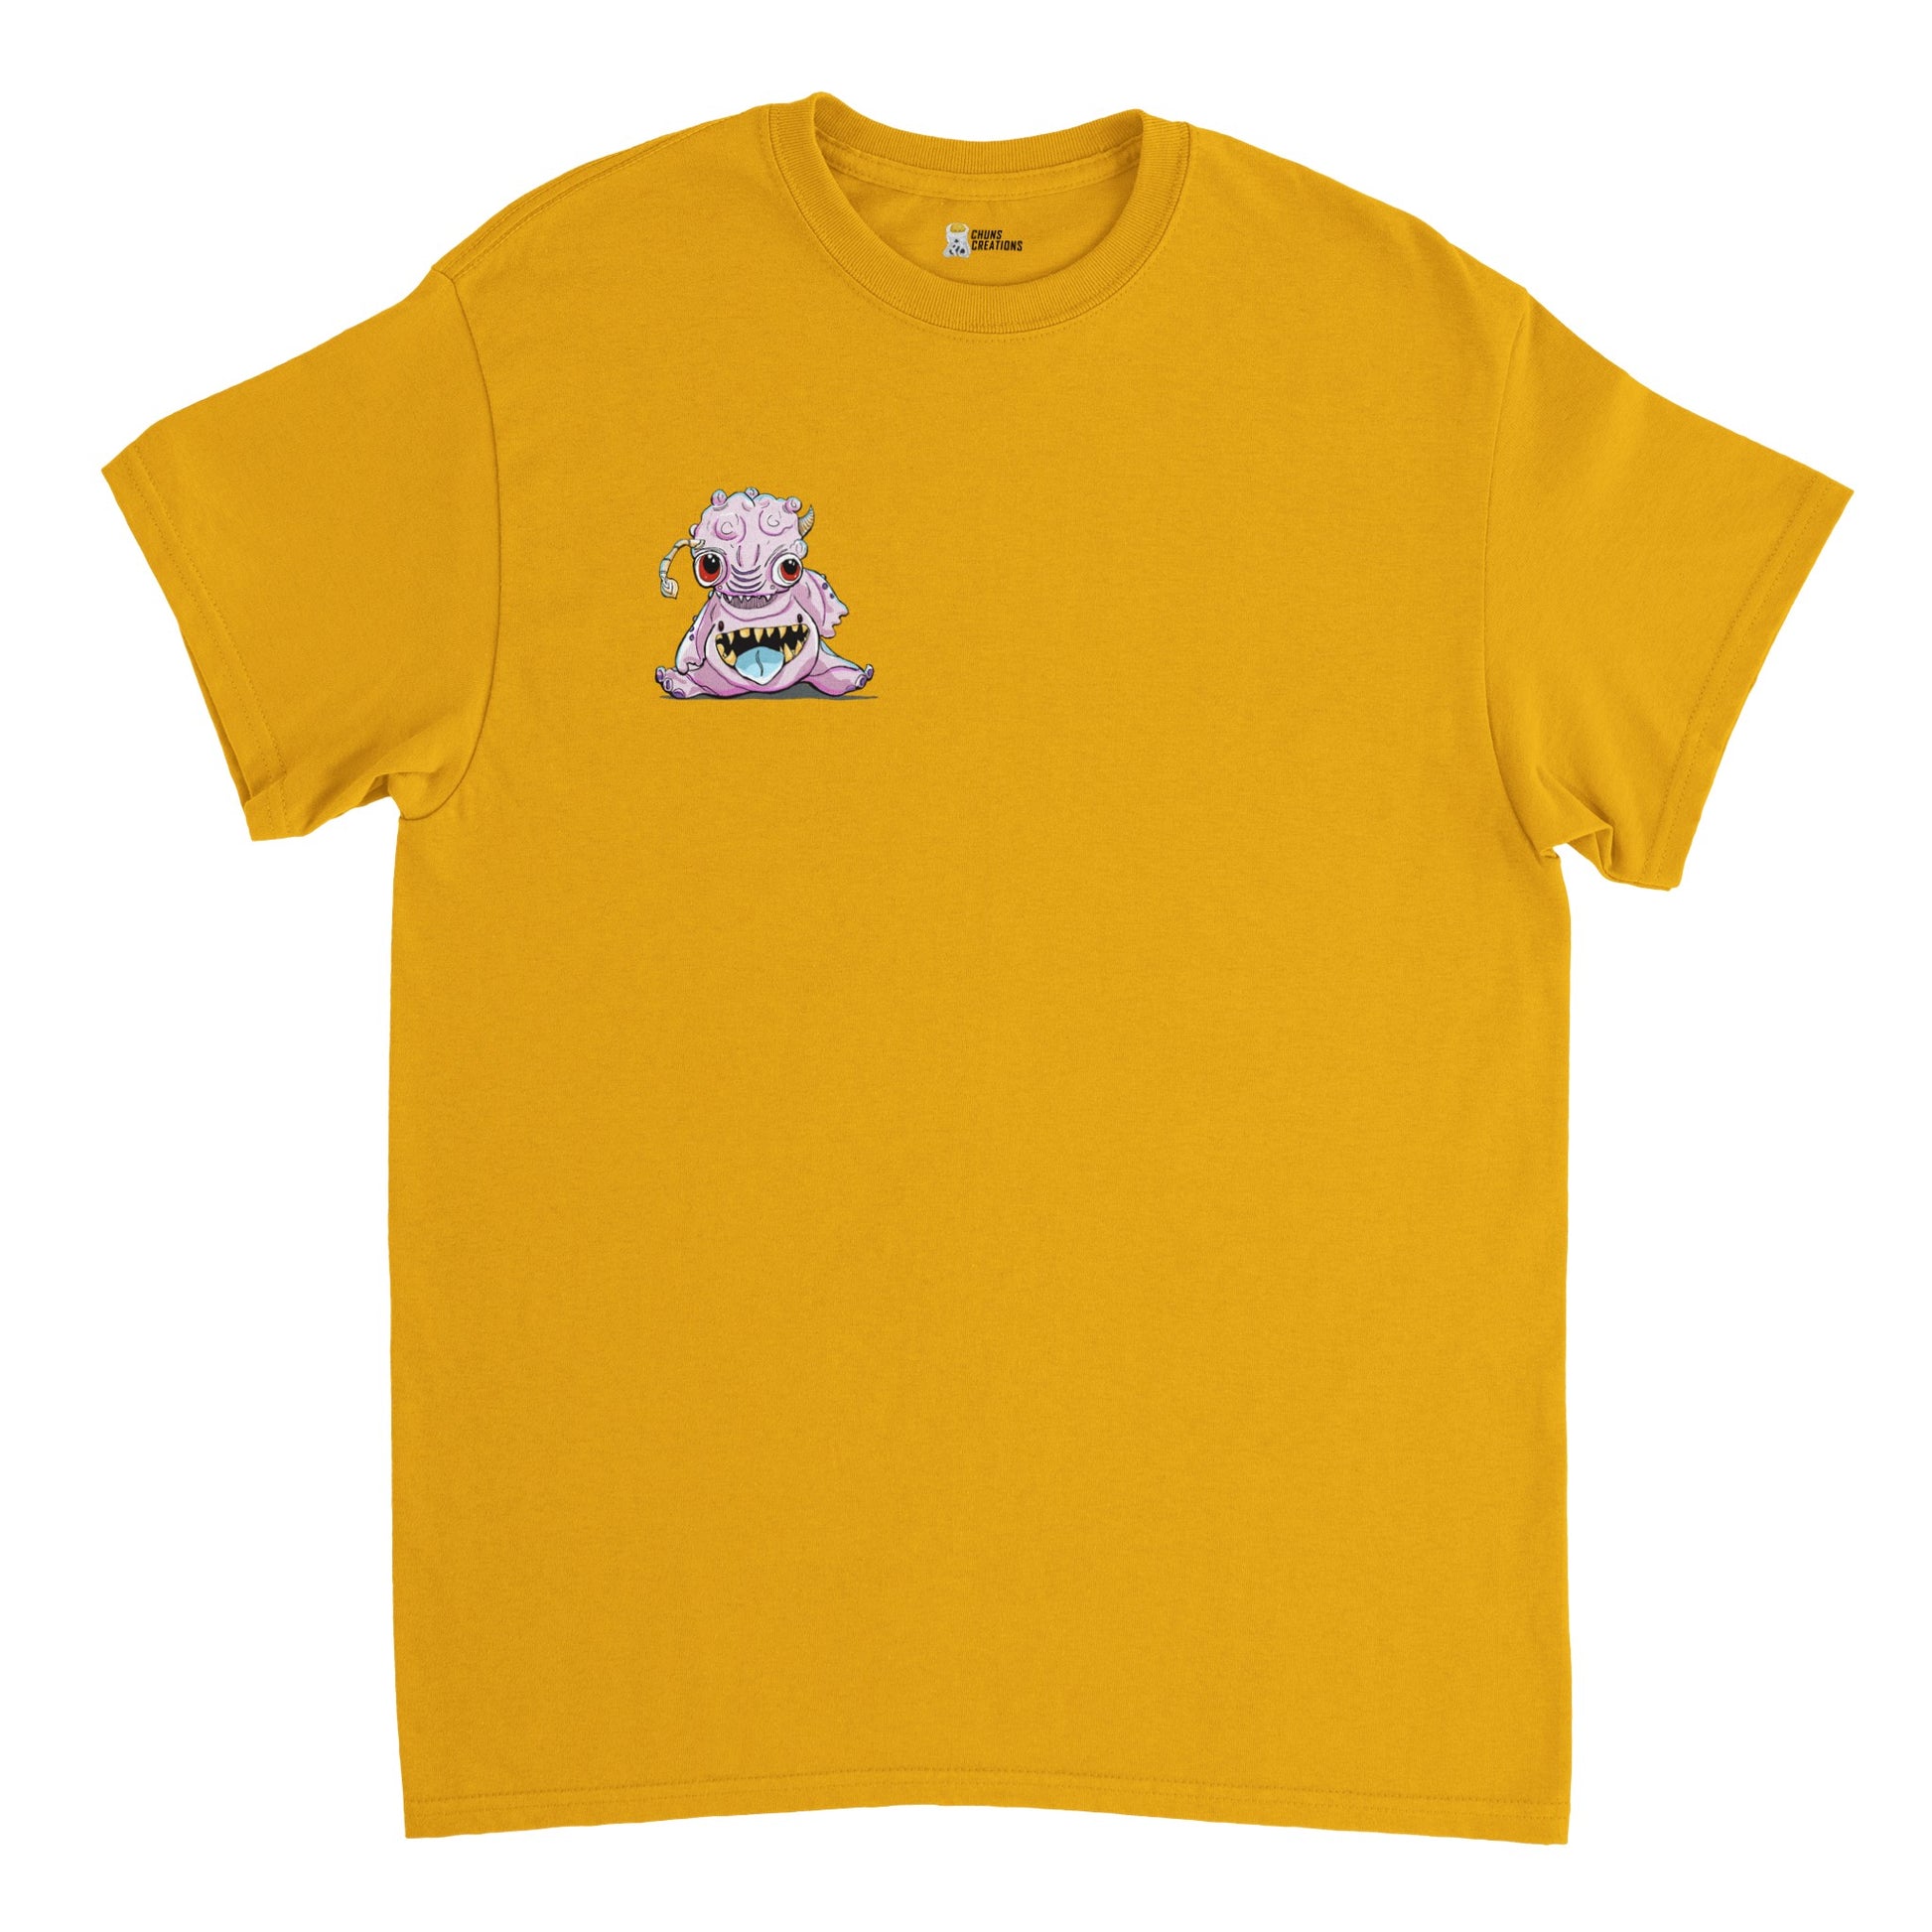 Yellow shirt. With a pink bublegum looking alien creature on the front of the shirt small "pocket sized" display on the front left